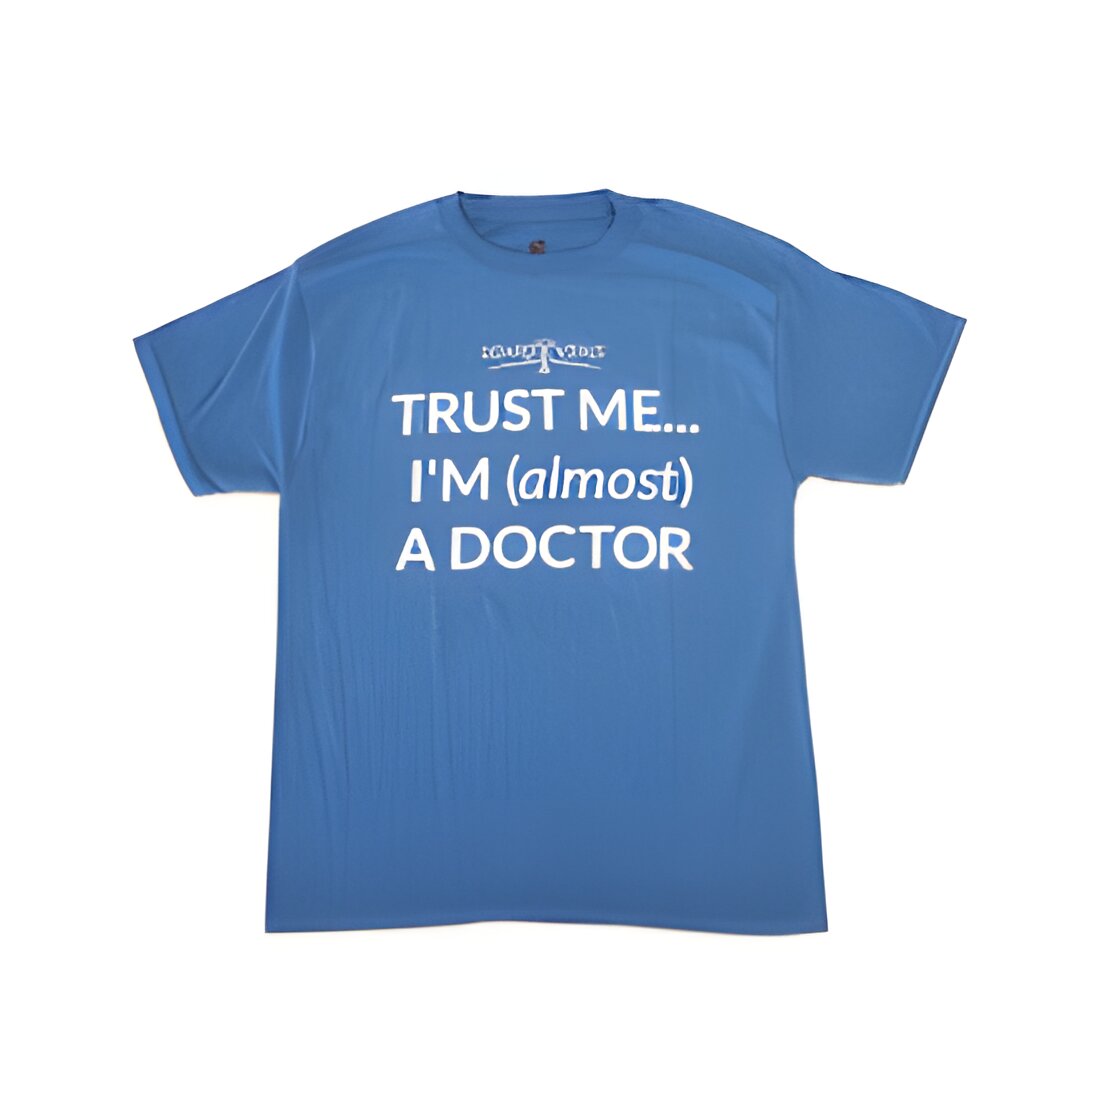 Free Trust Me... I'M (Almost) A Doctor T-Shirt